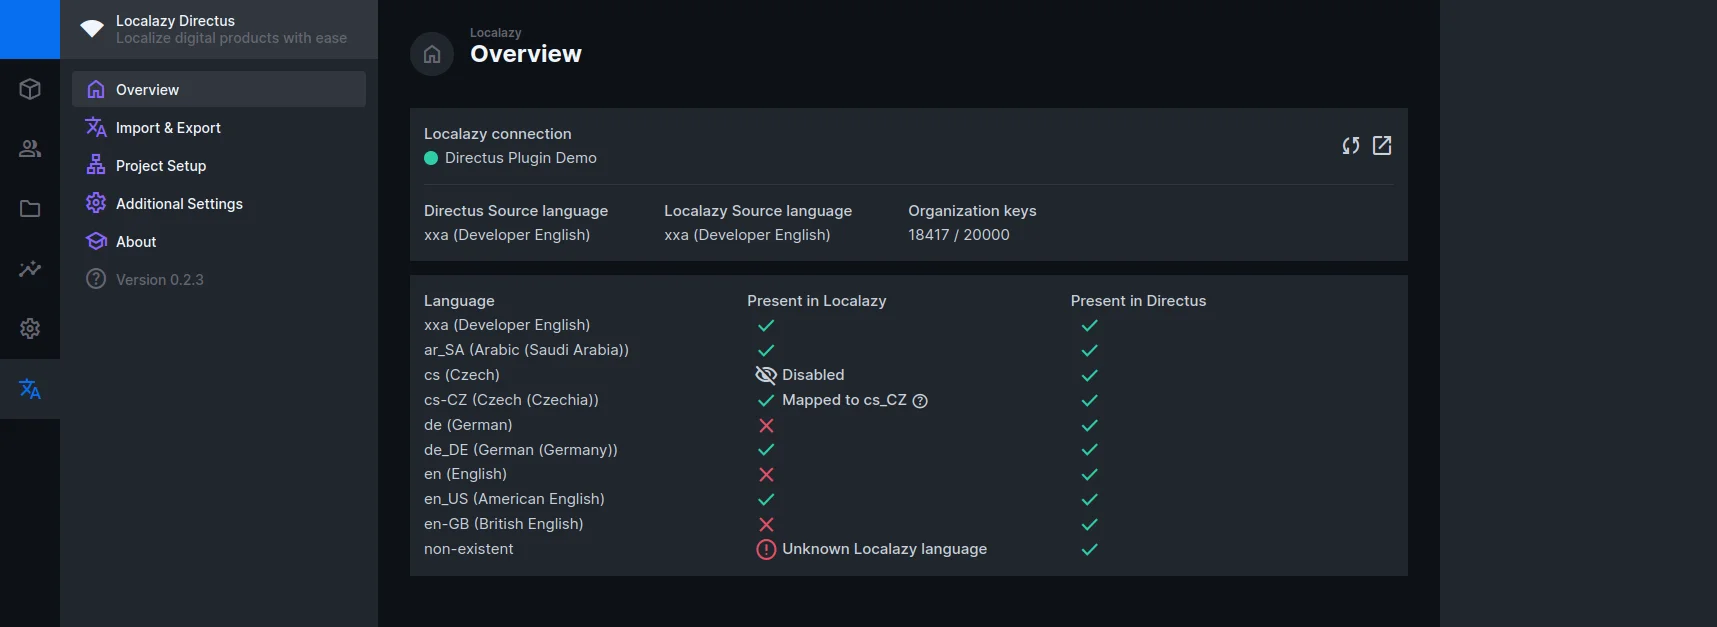 Directus Localization plugin by Localazy - Overview screen